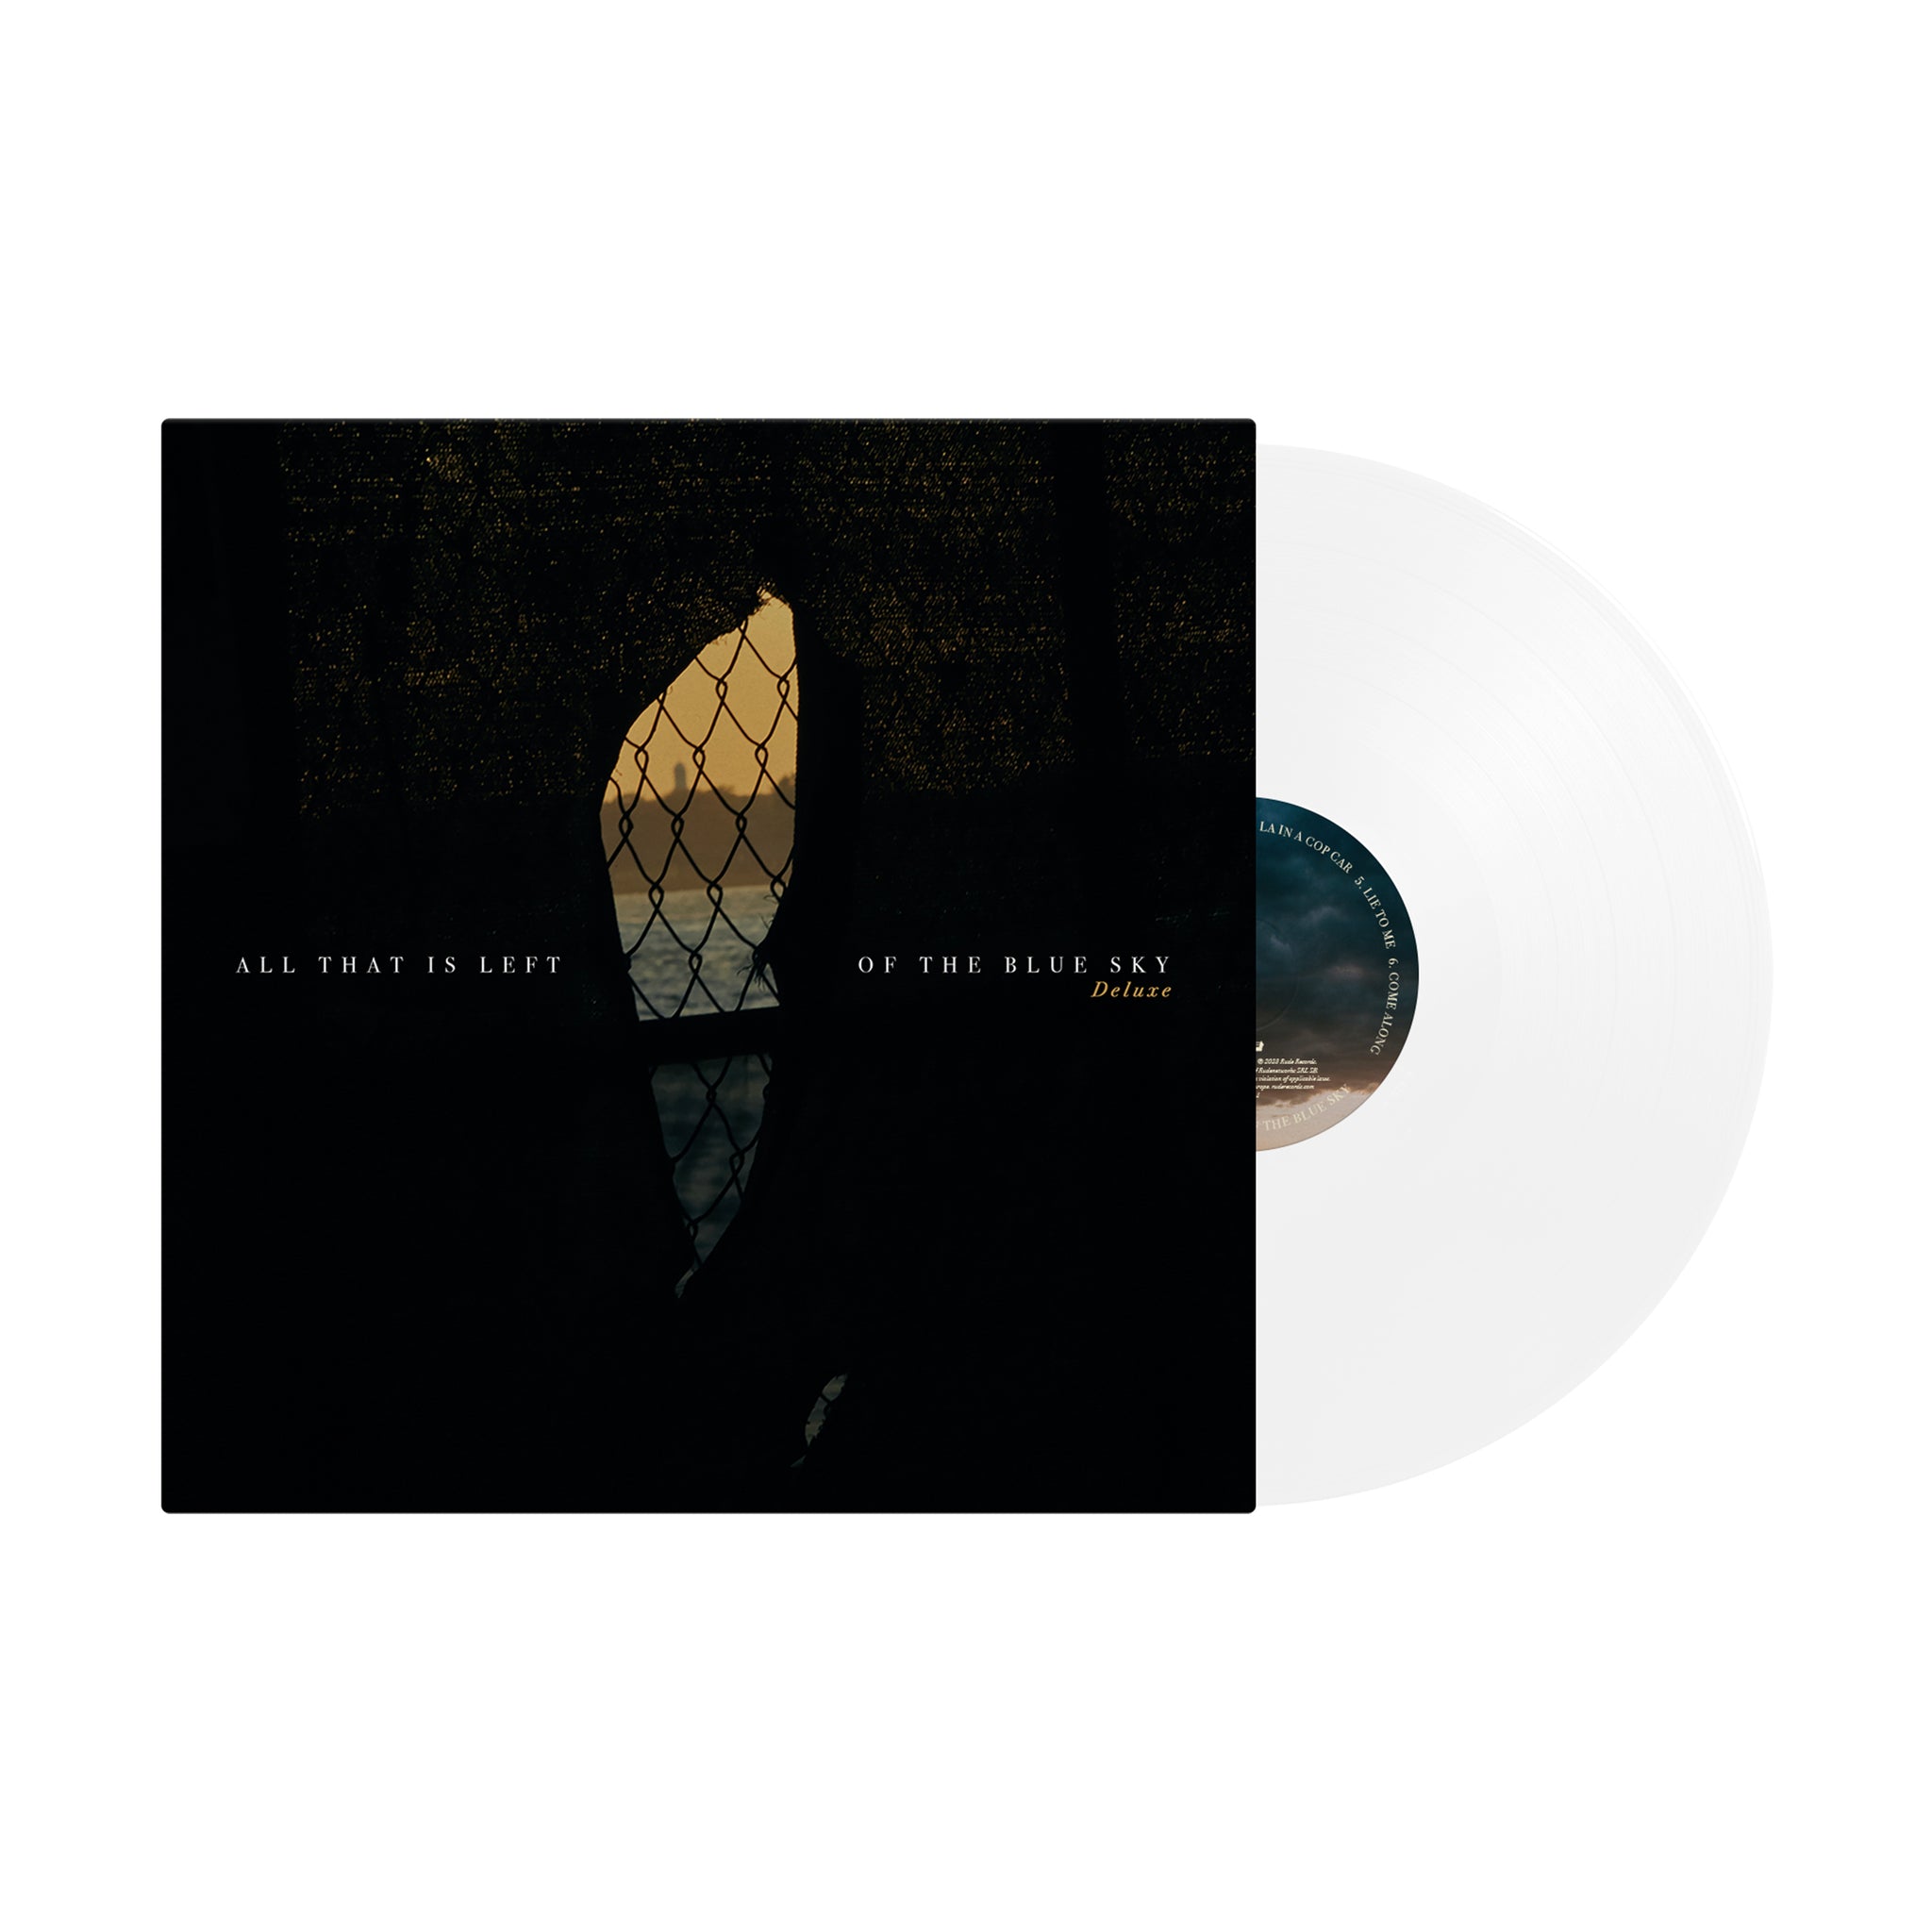 All That Is Left of the Blue Sky (Deluxe Edition) Ultra Clear Vinyl LP